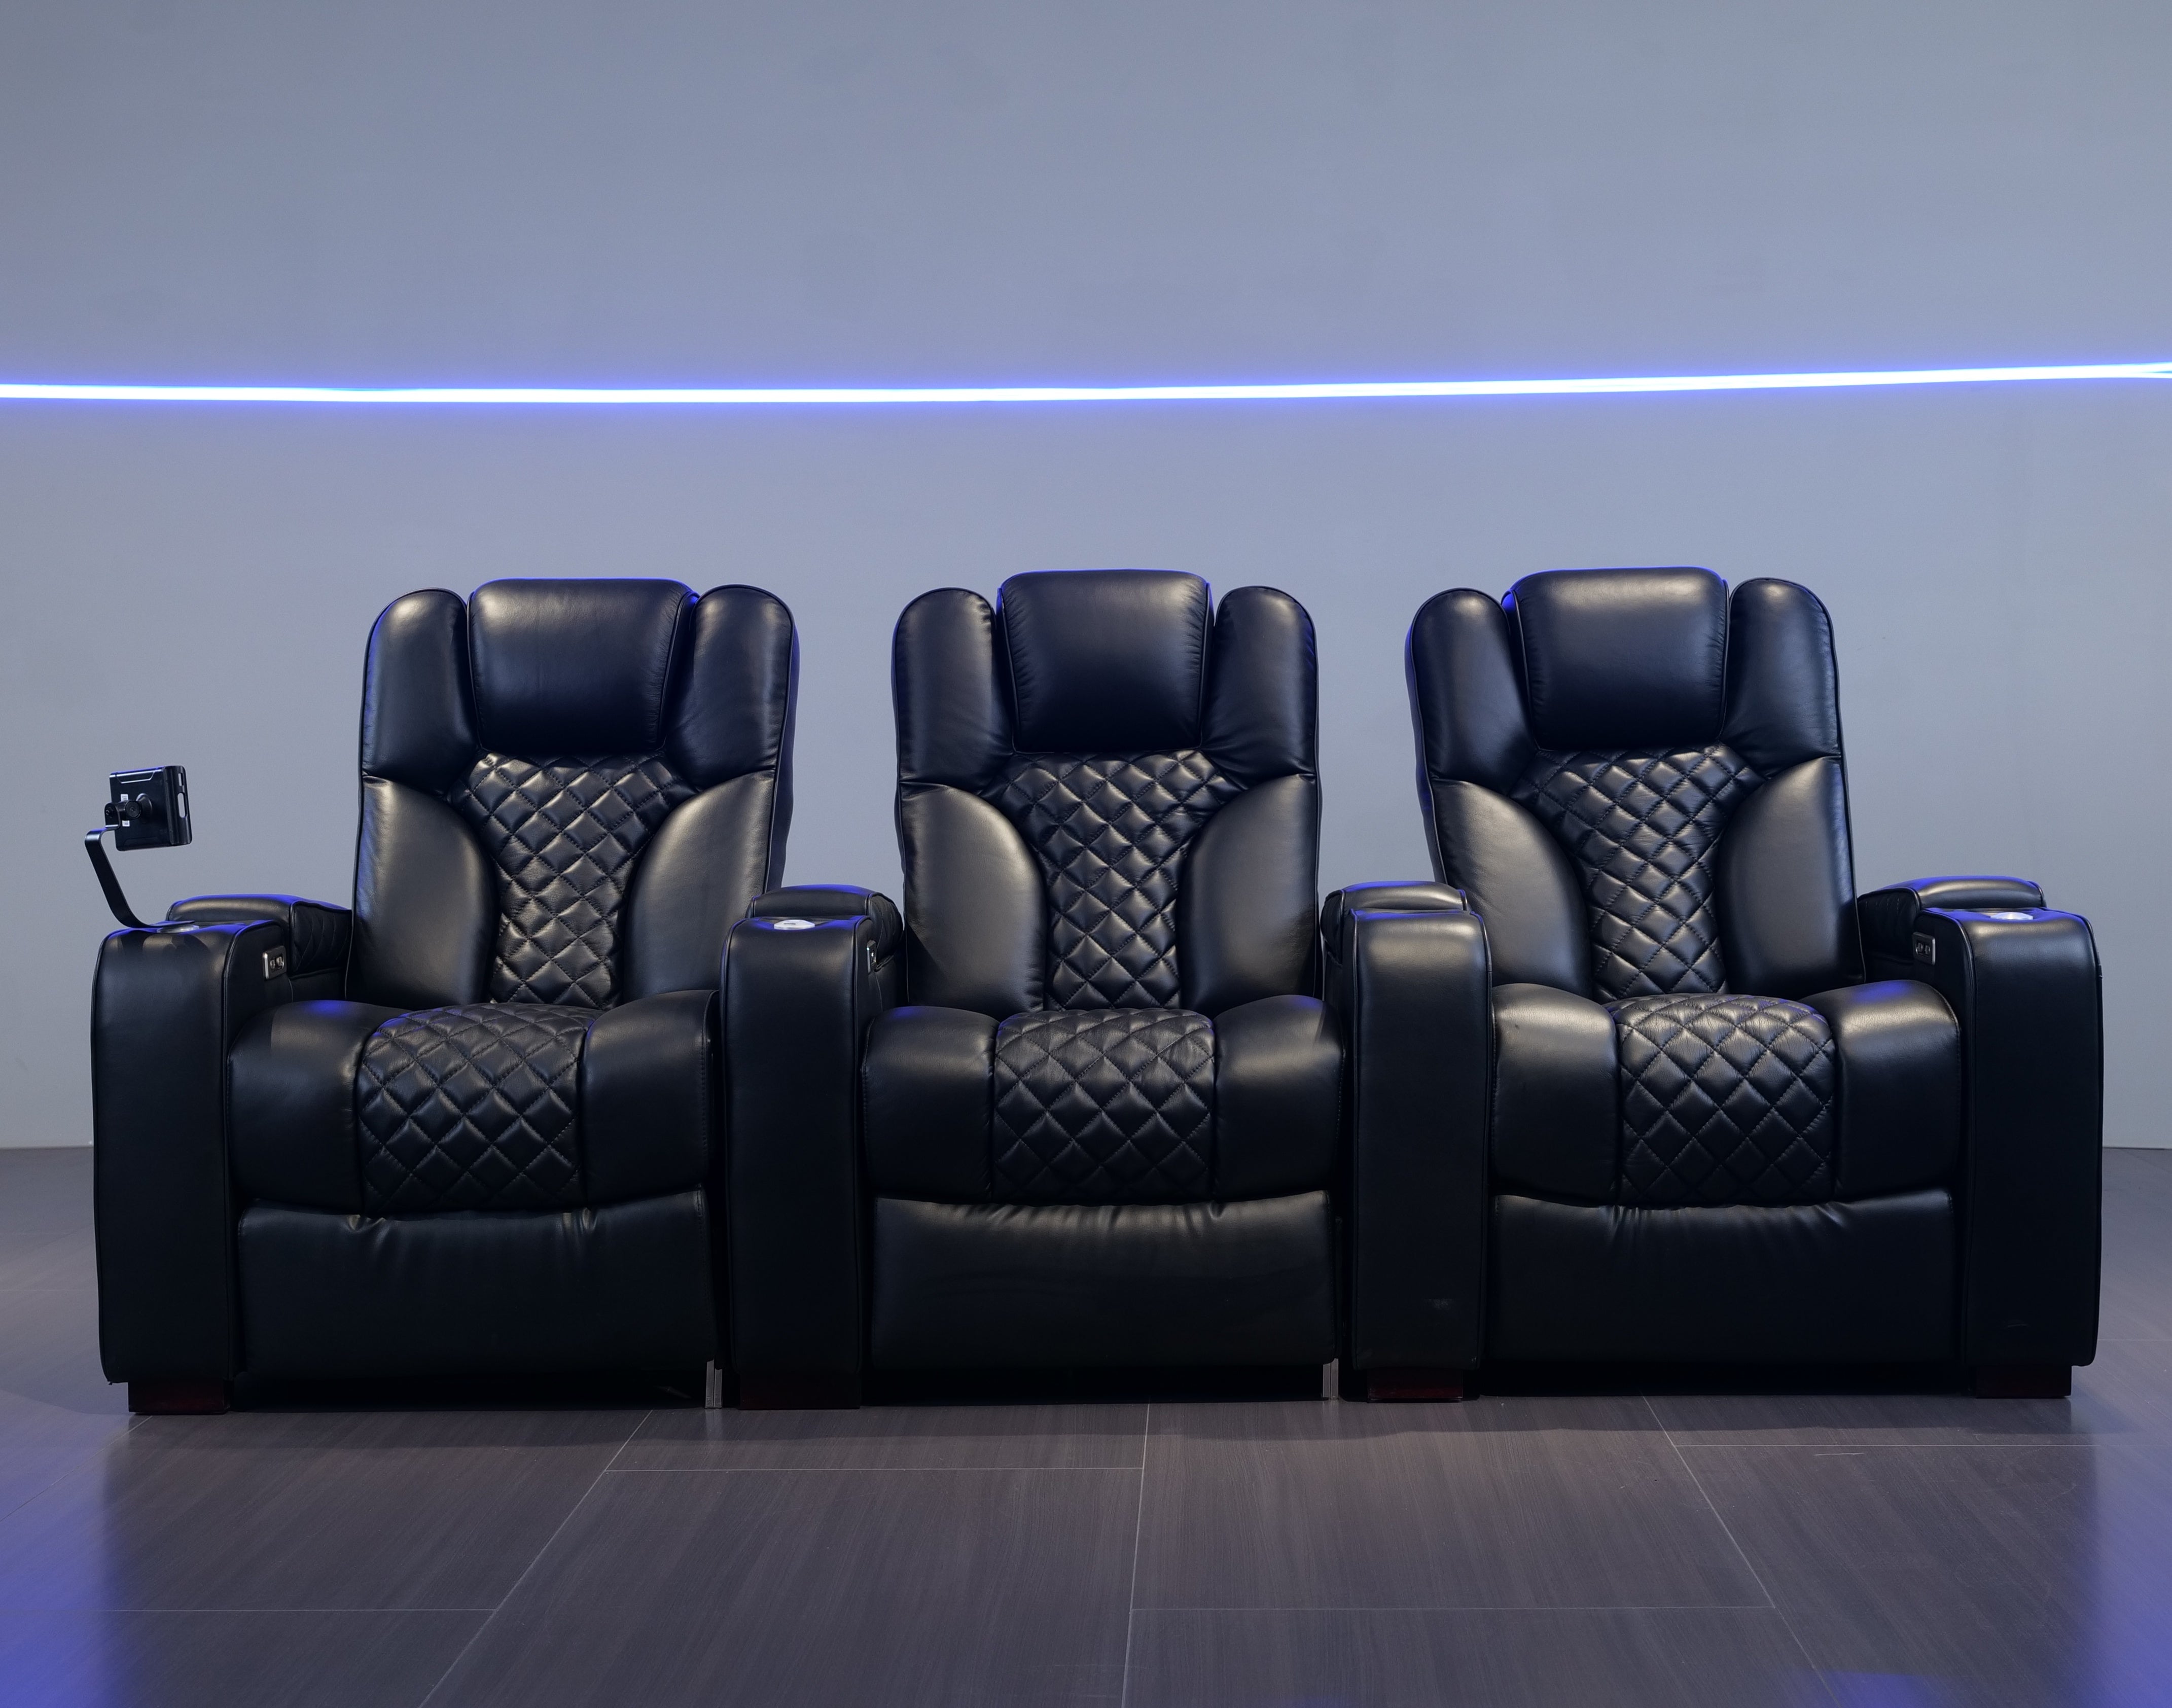 Designing a Well-Ventilated Seating Layout in Your Home Theater Space